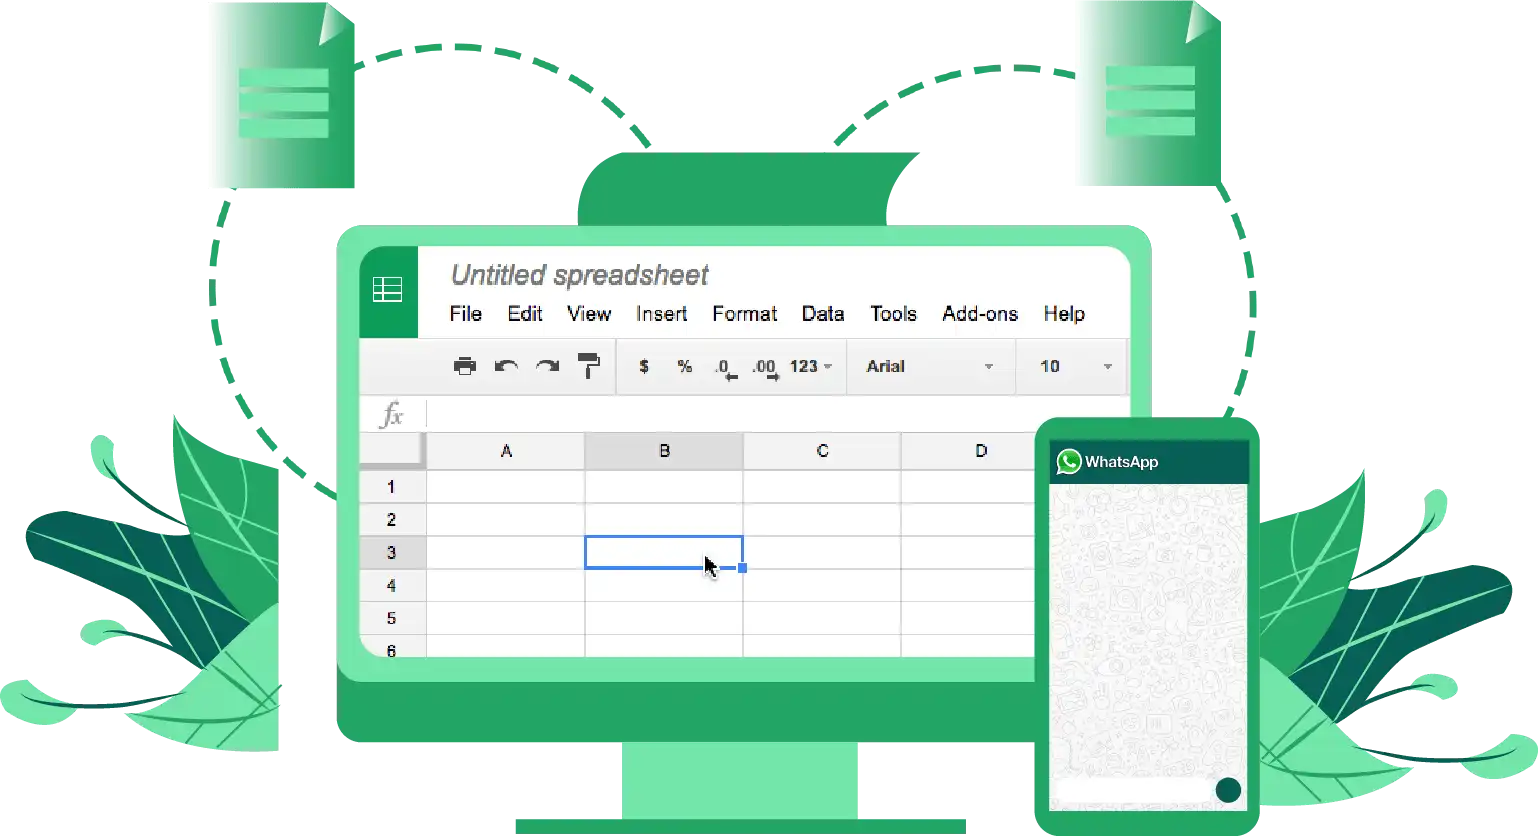 Why Integrate WhatsApp and Google Sheets?